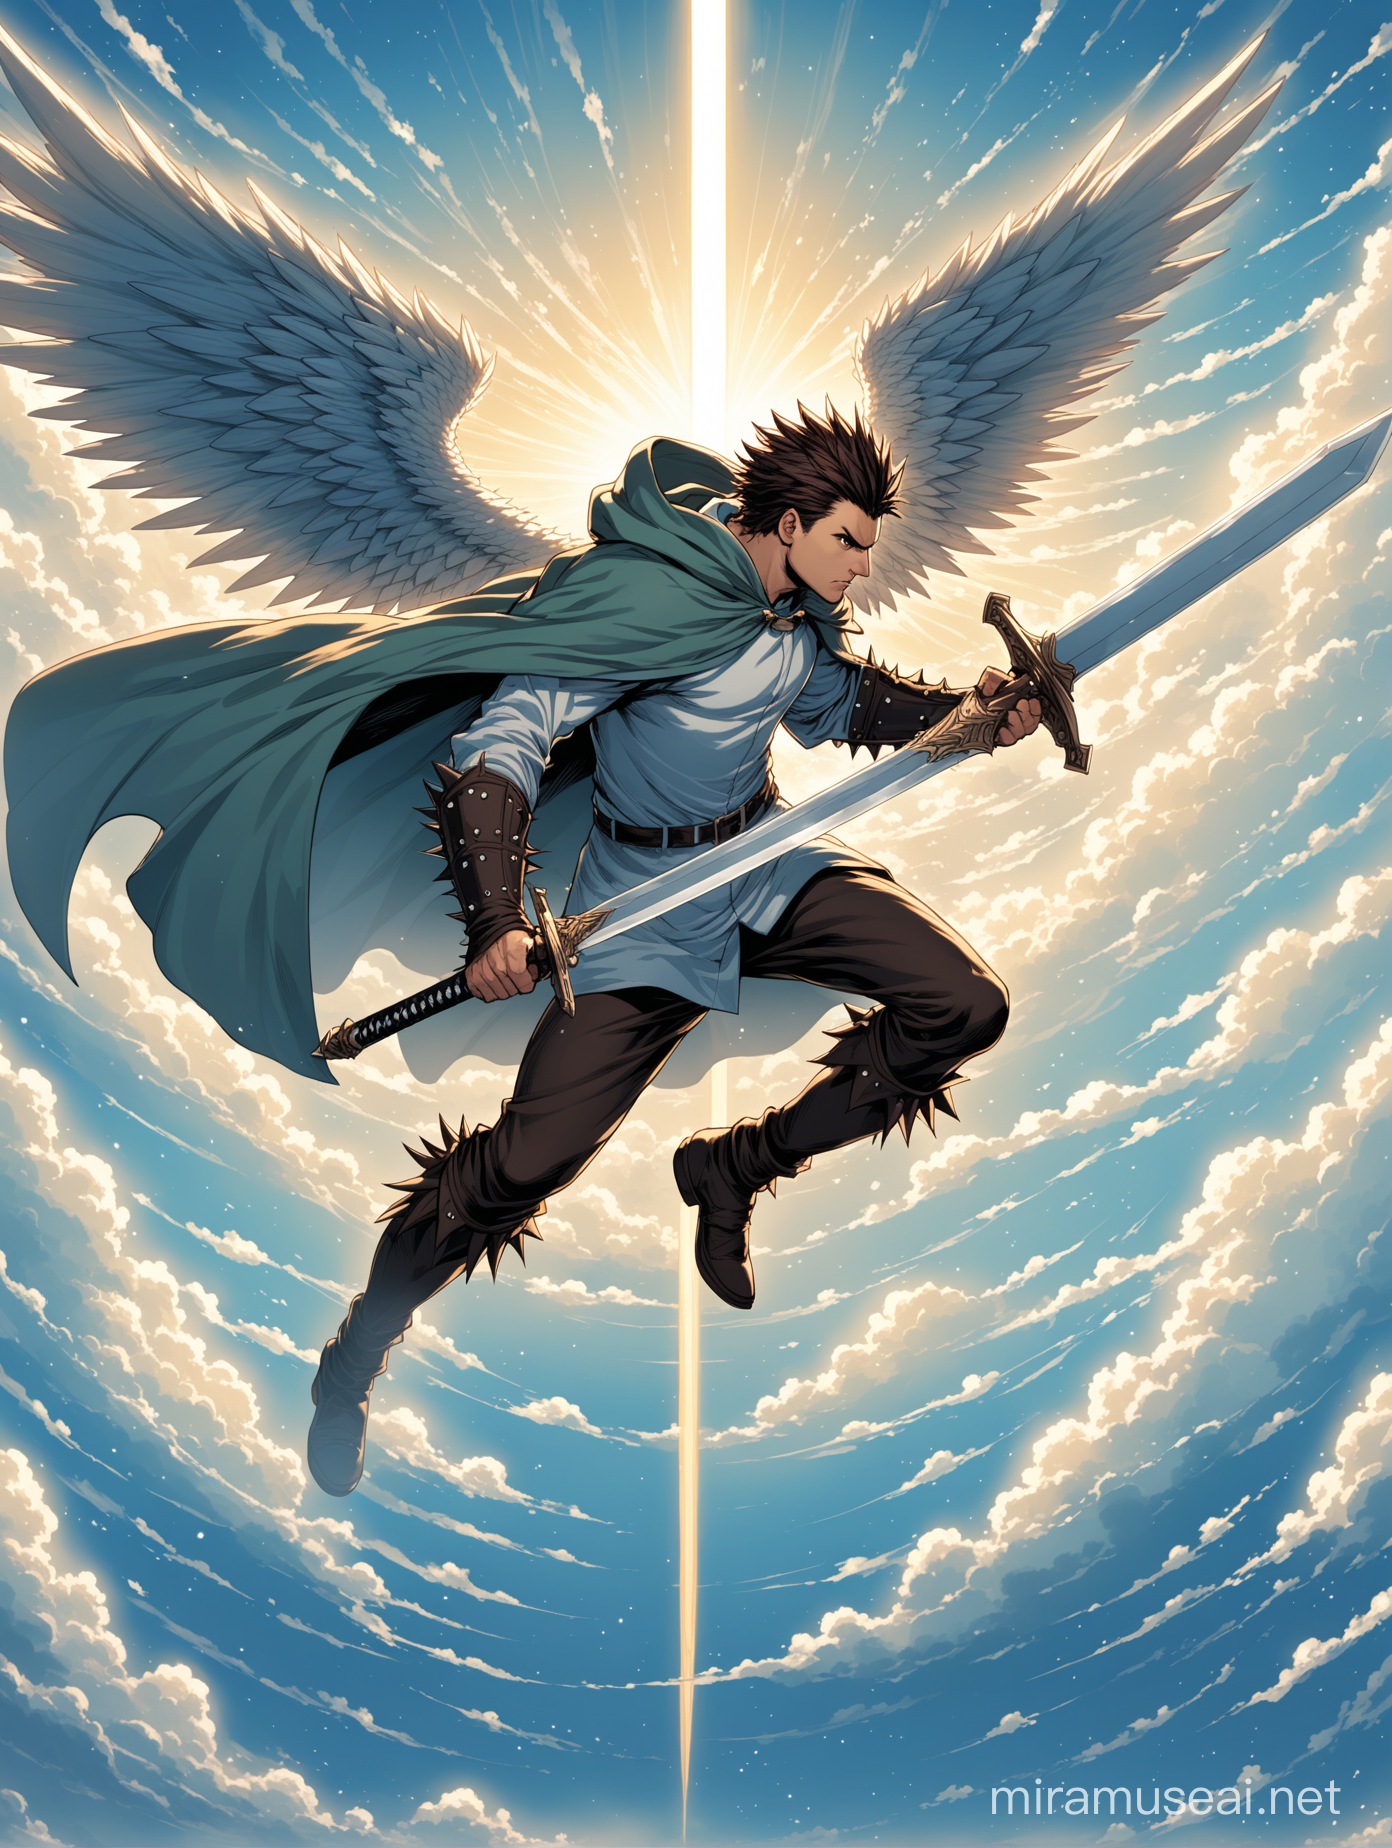 man in a cloak fighting in the sky with a braid and spiky hair he has angel wings and is fighting with a sword looking to the right